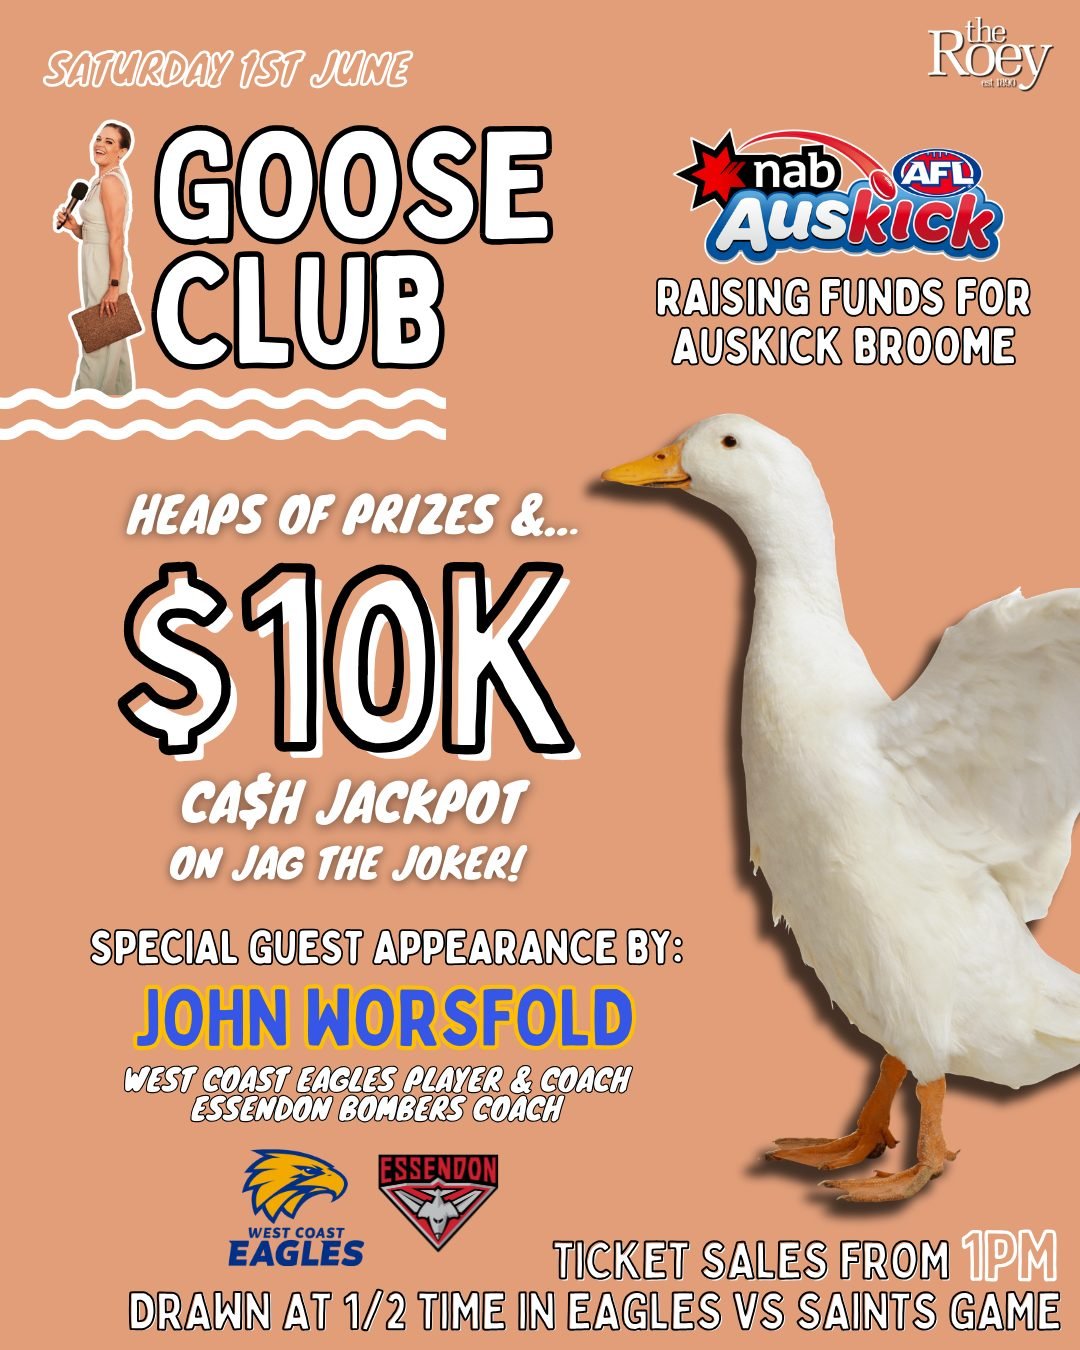 Don't miss Saturday's epic GOOSE CLUB...this week we are allllll about FOOTY ✌🏽🏉

As a first day of the month TREAT, we'll be joined by a special guest, two time premiership player &amp; one time premiership coach...

🔹JOHN WORSFOLD🔸
West Coast E